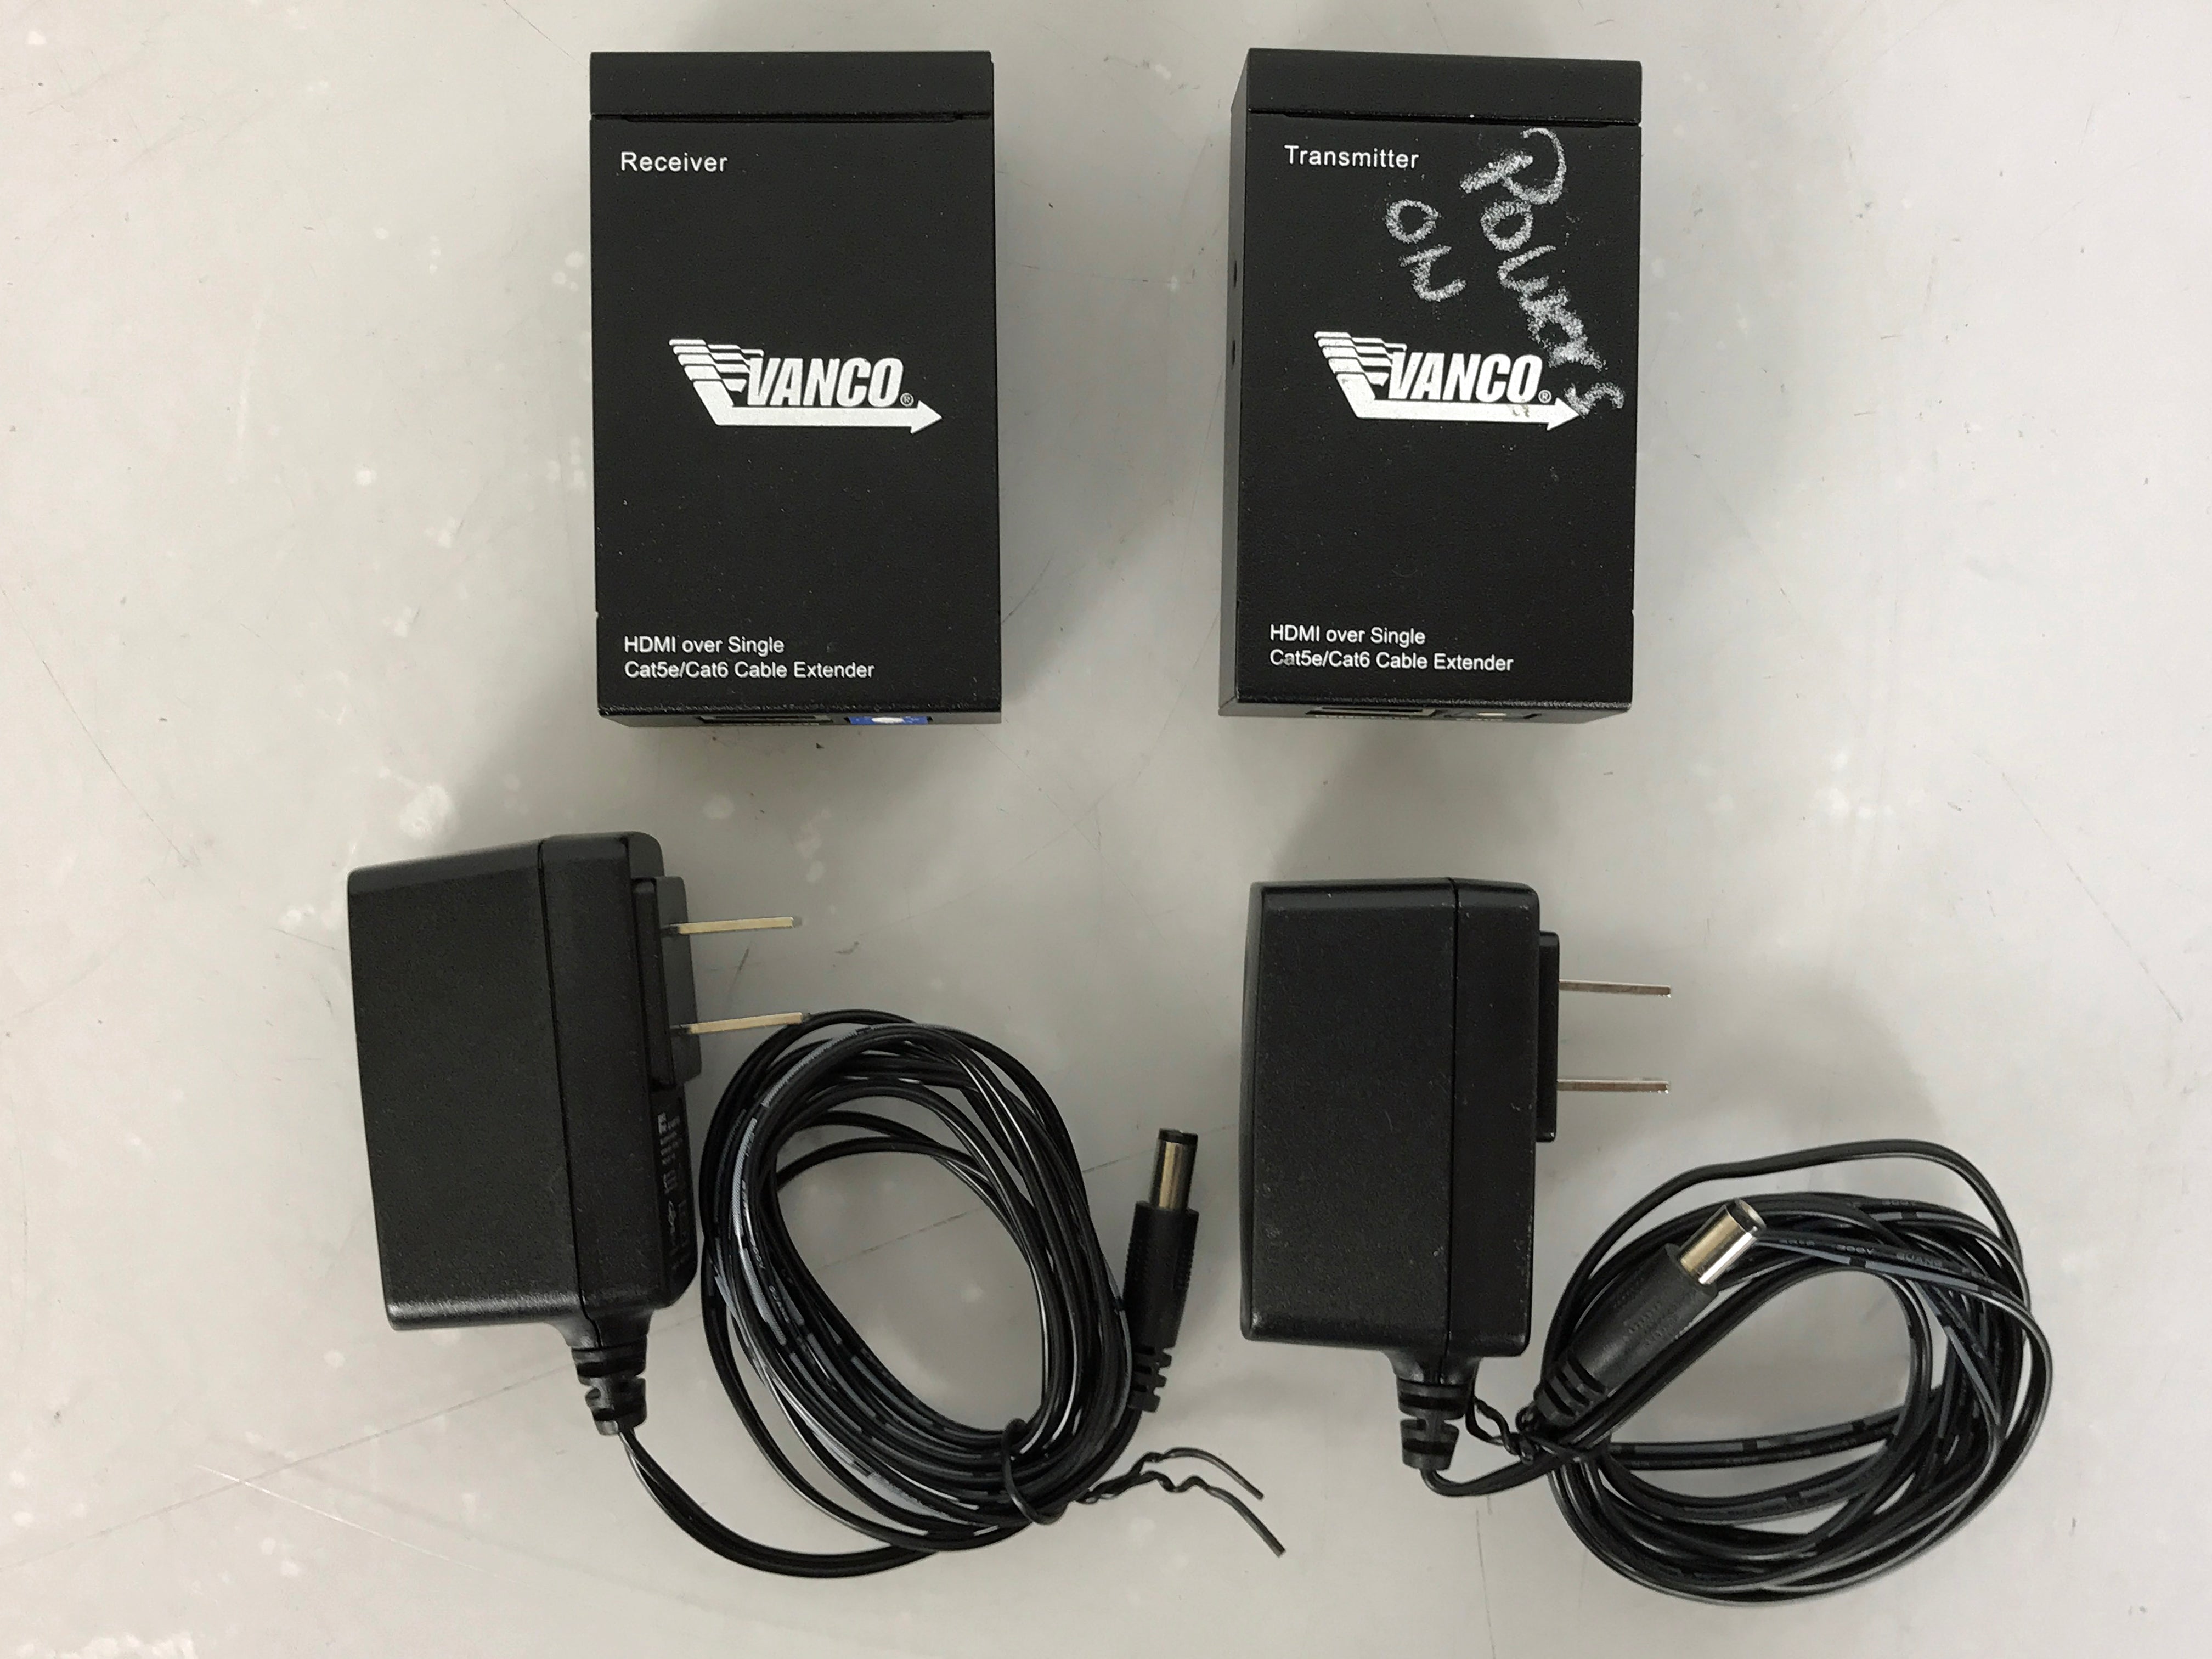 Vanco HDMI Over Single Cat5e/Cat6 Cable Extender Receiver and Transmitter